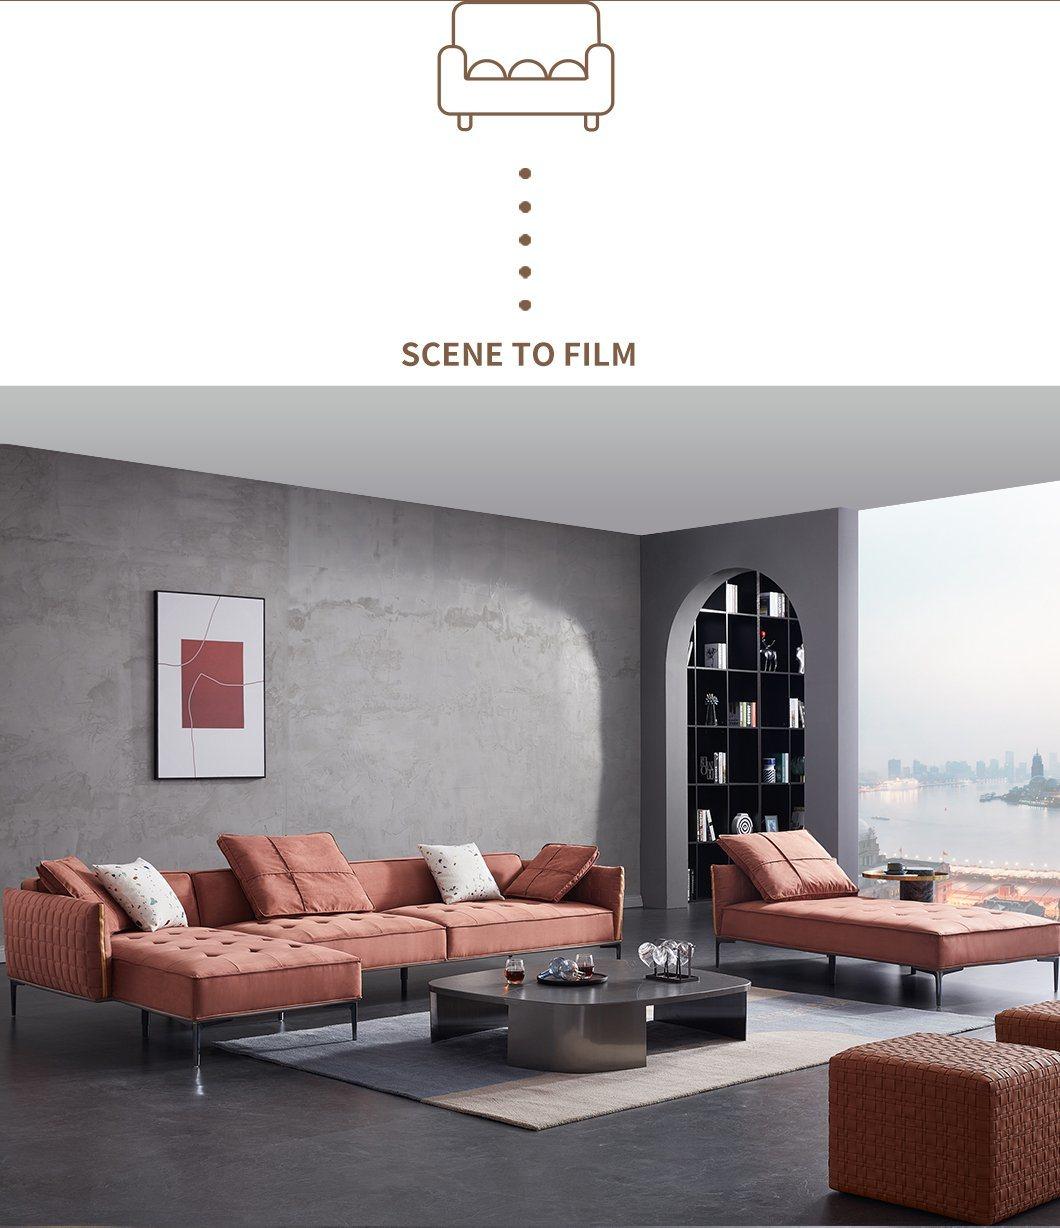 High-End Sectional Science and Technology Cloth Sofa Home Furniture